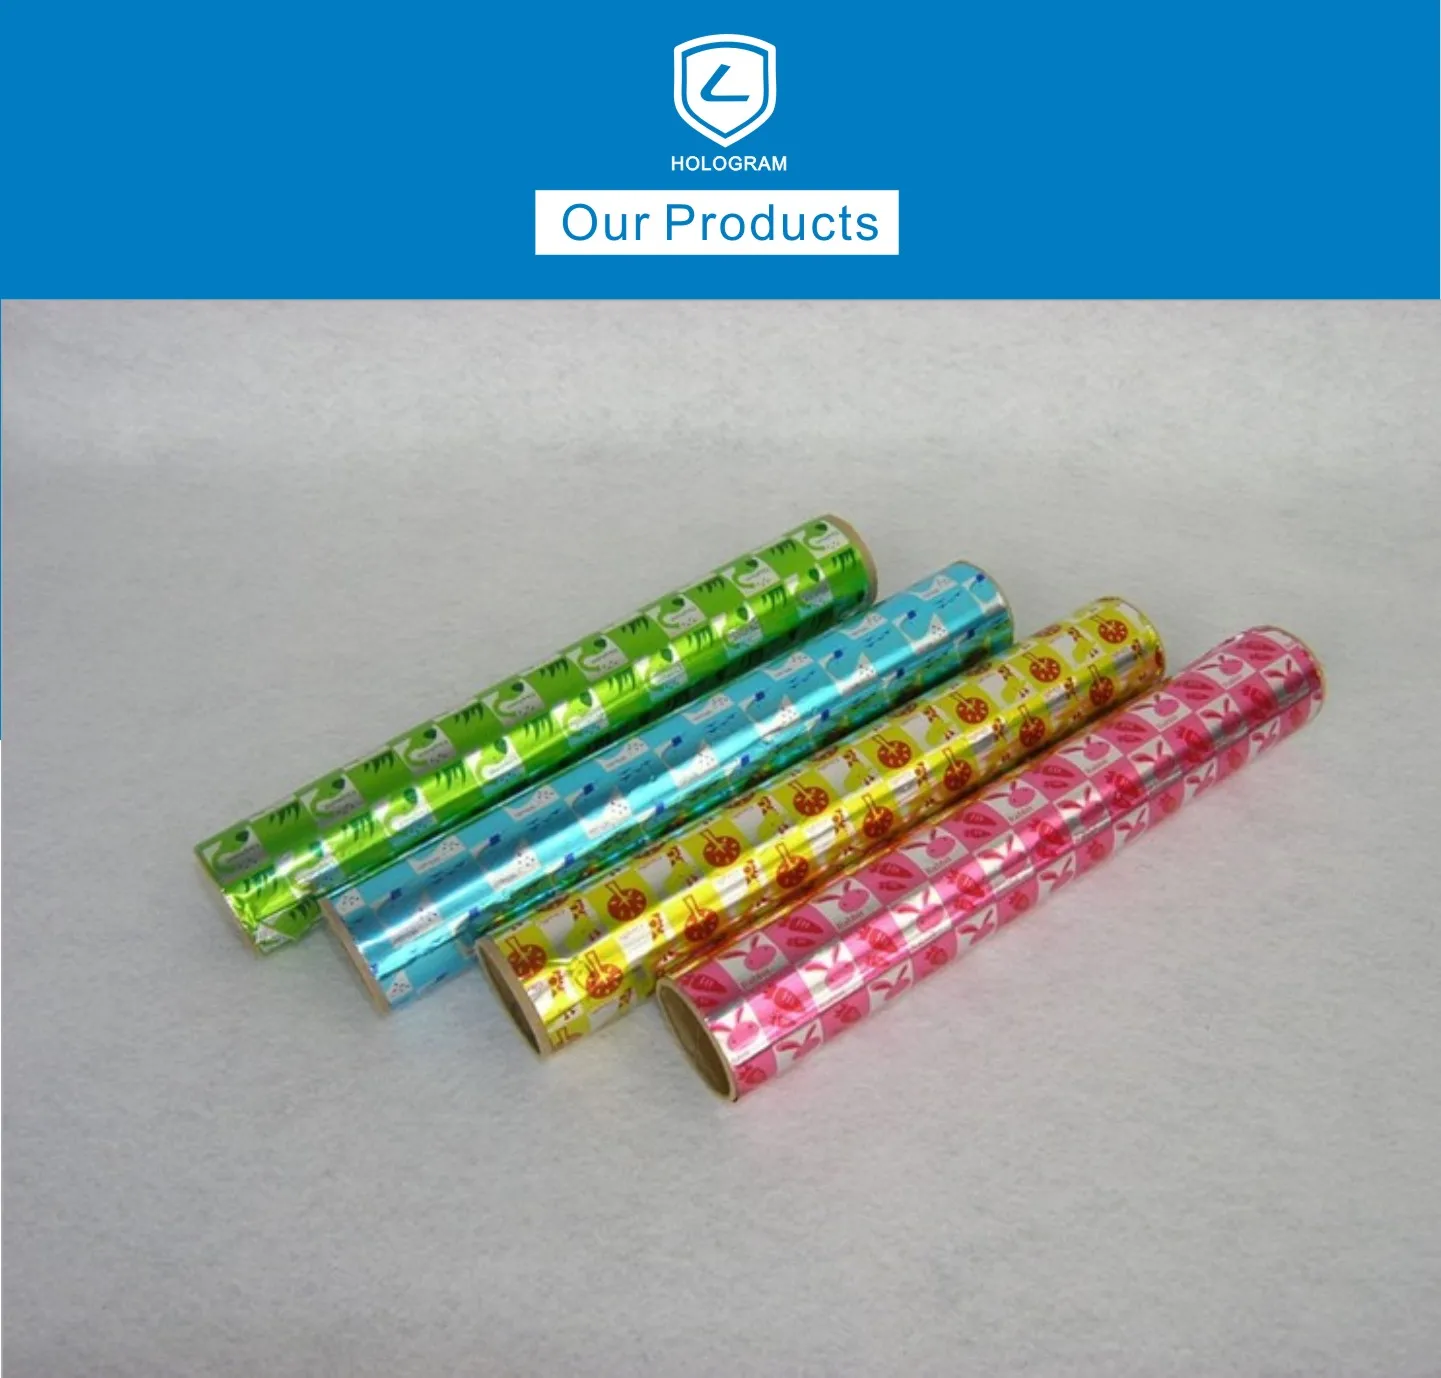 LIDUN Free Sample Supply All kinds of Hot Stamping Foil for Abs/Plastic,Paper,Pvc,Fabrics,etc Hot Stamping Foil for Abs